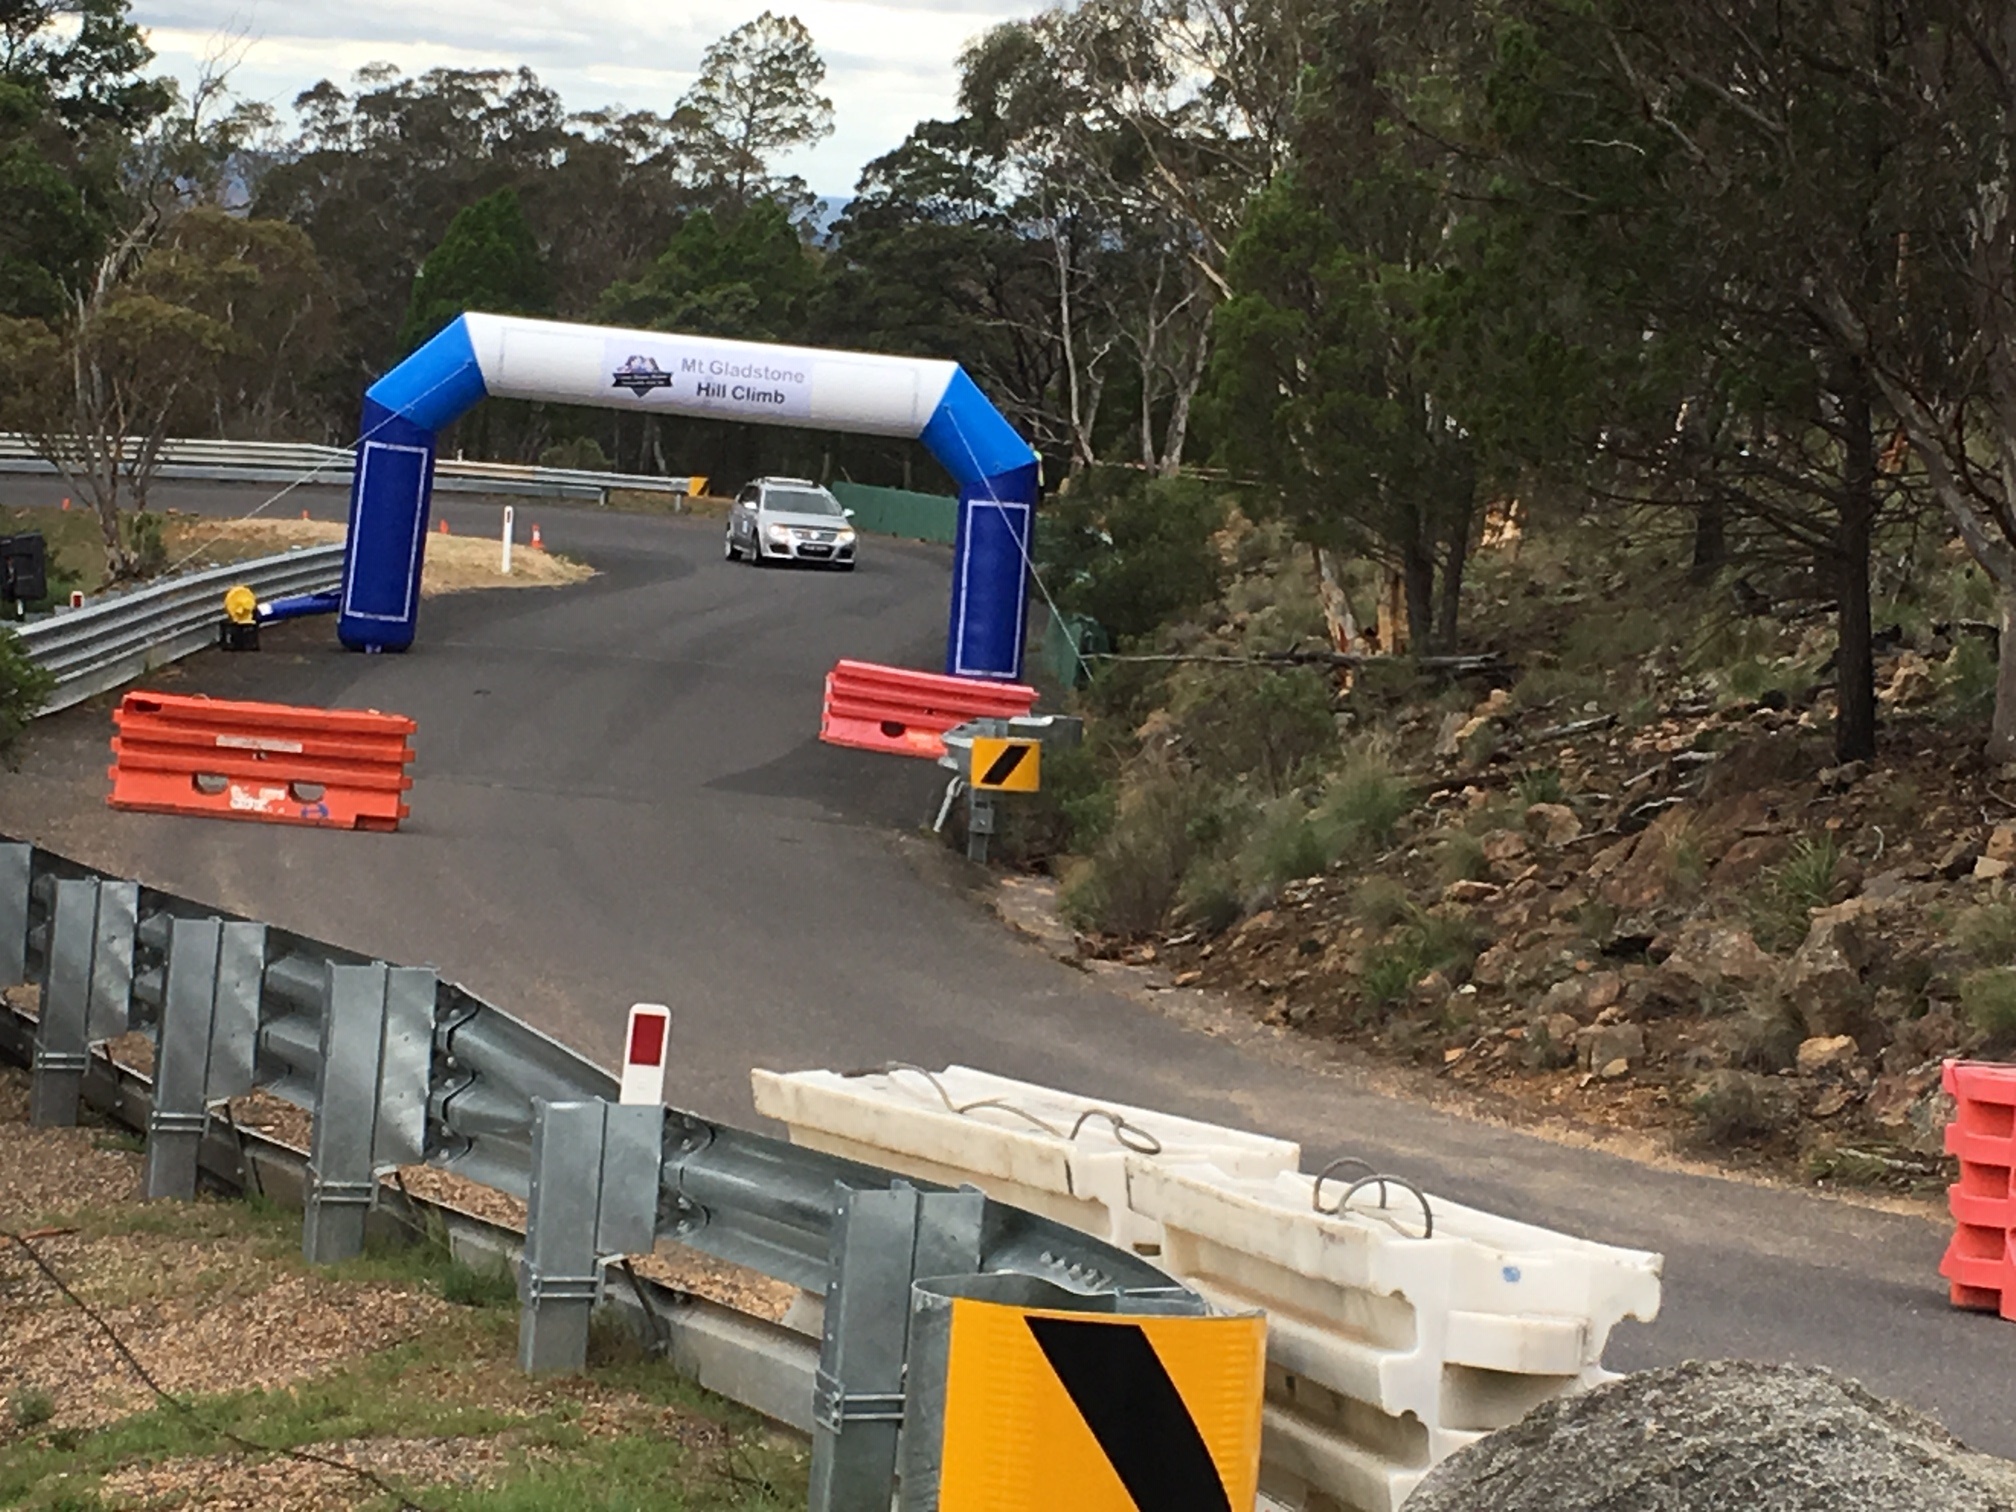 Gareth Rees 'King of the Mountain' at Cooma Hill Climb